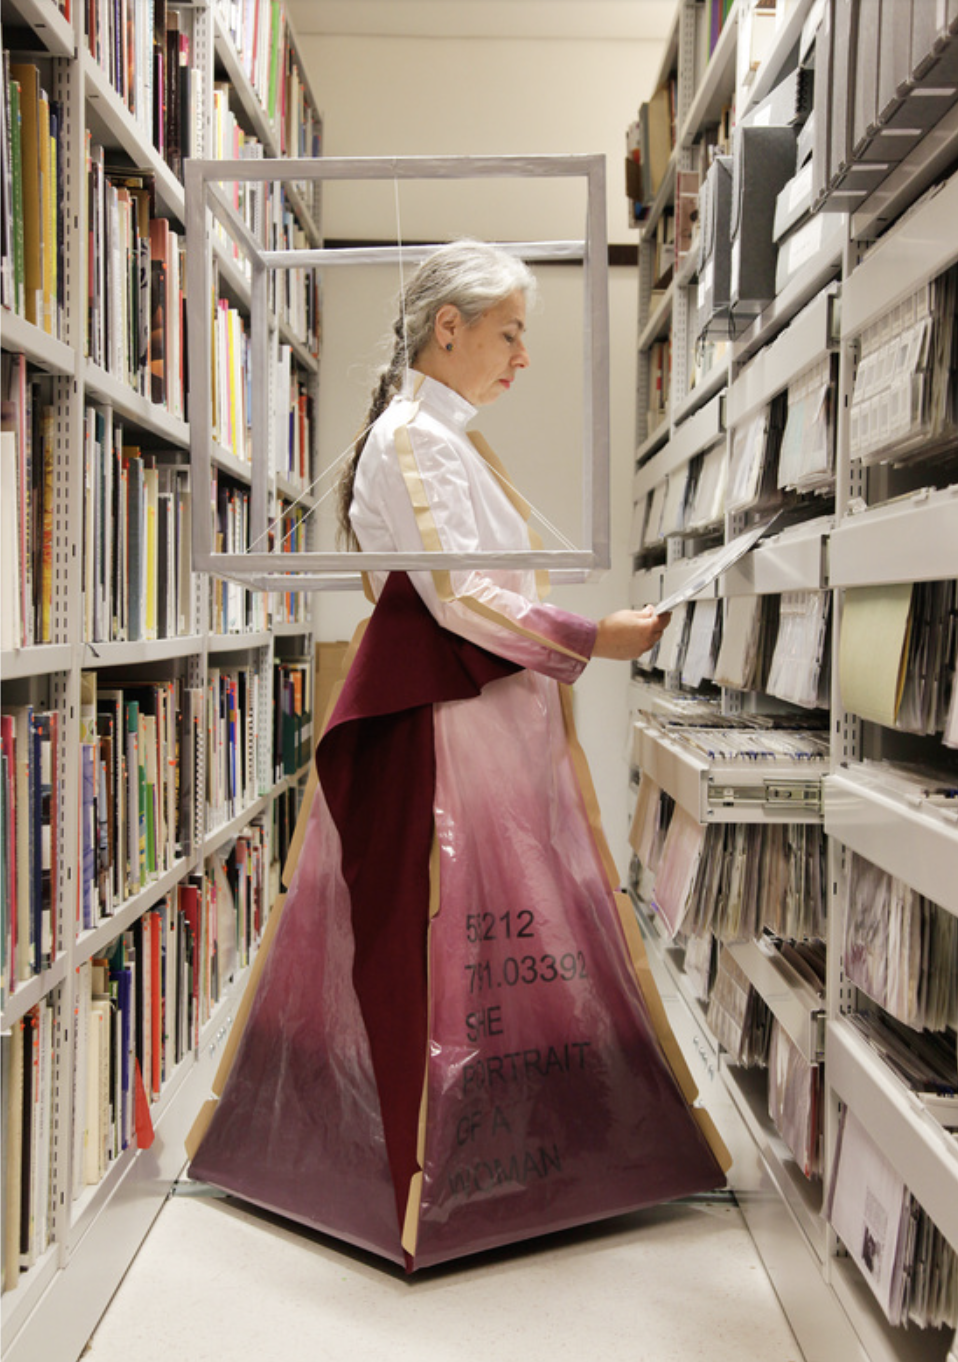 Image of Althea Greenan wearing a period costume looking at a book between the stacks. 